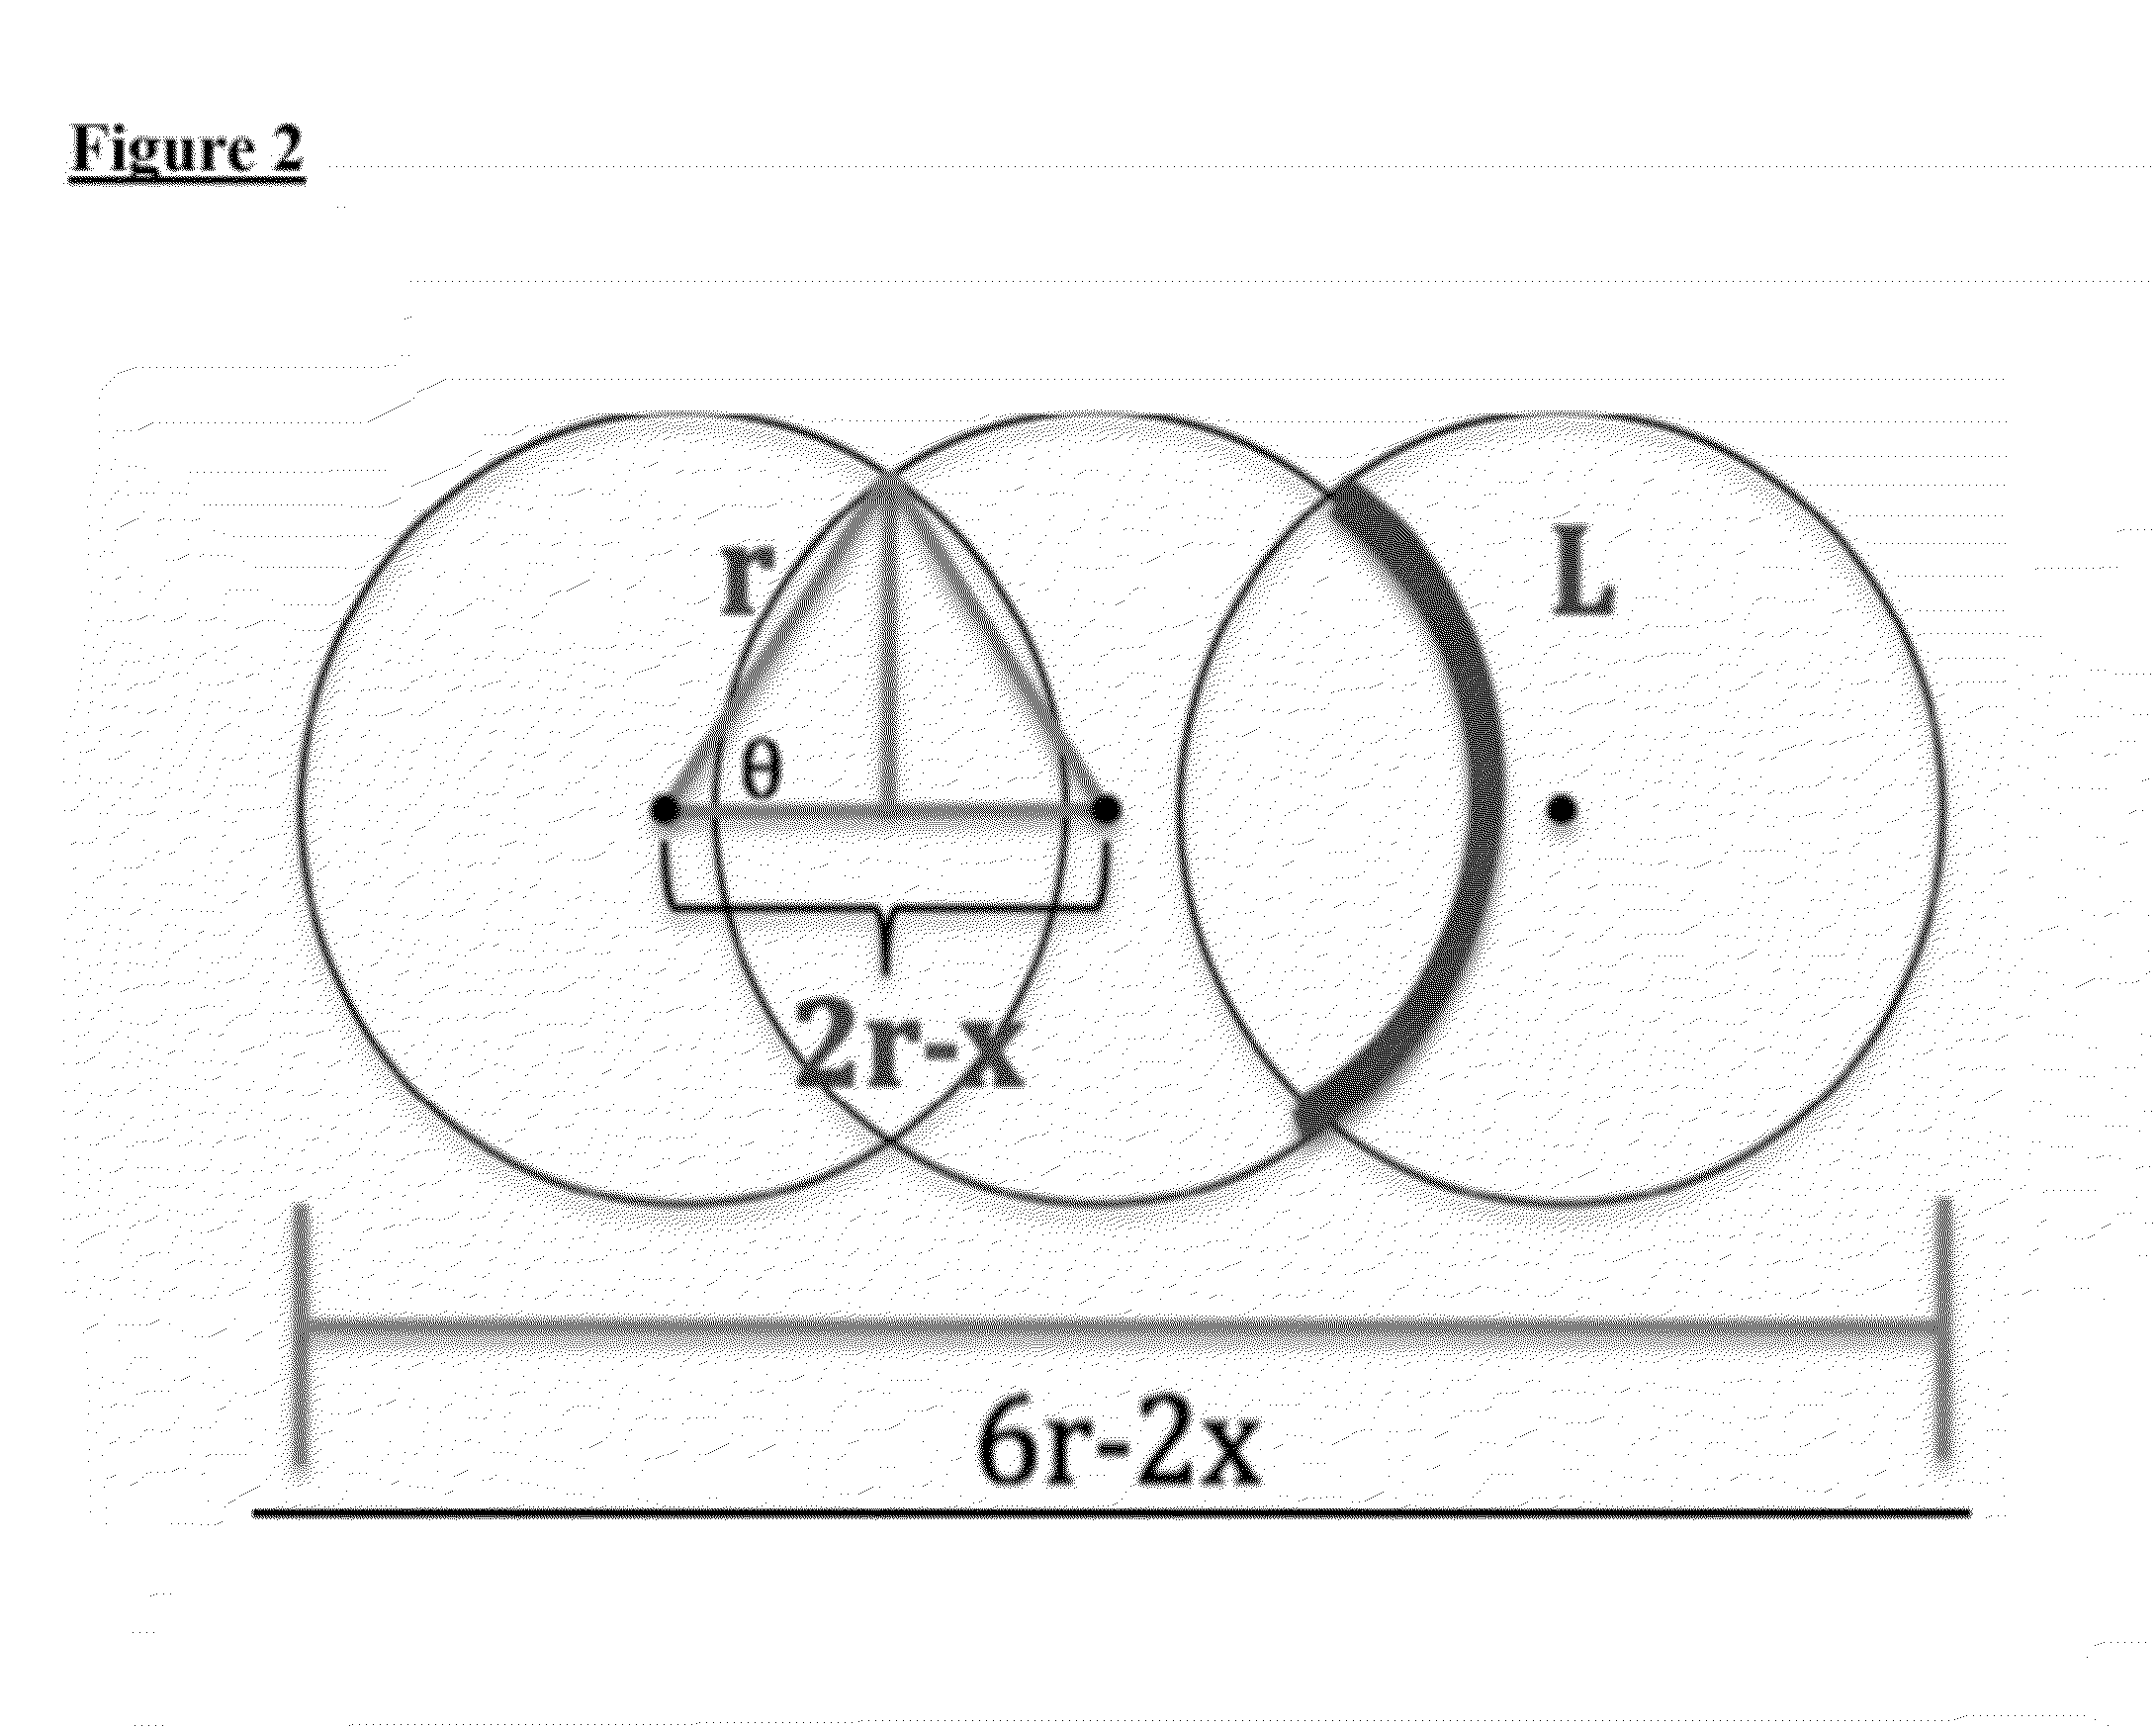 Peptide amphiphiles and methods to electrostatically control bioactivity of the ikvav peptide epitope